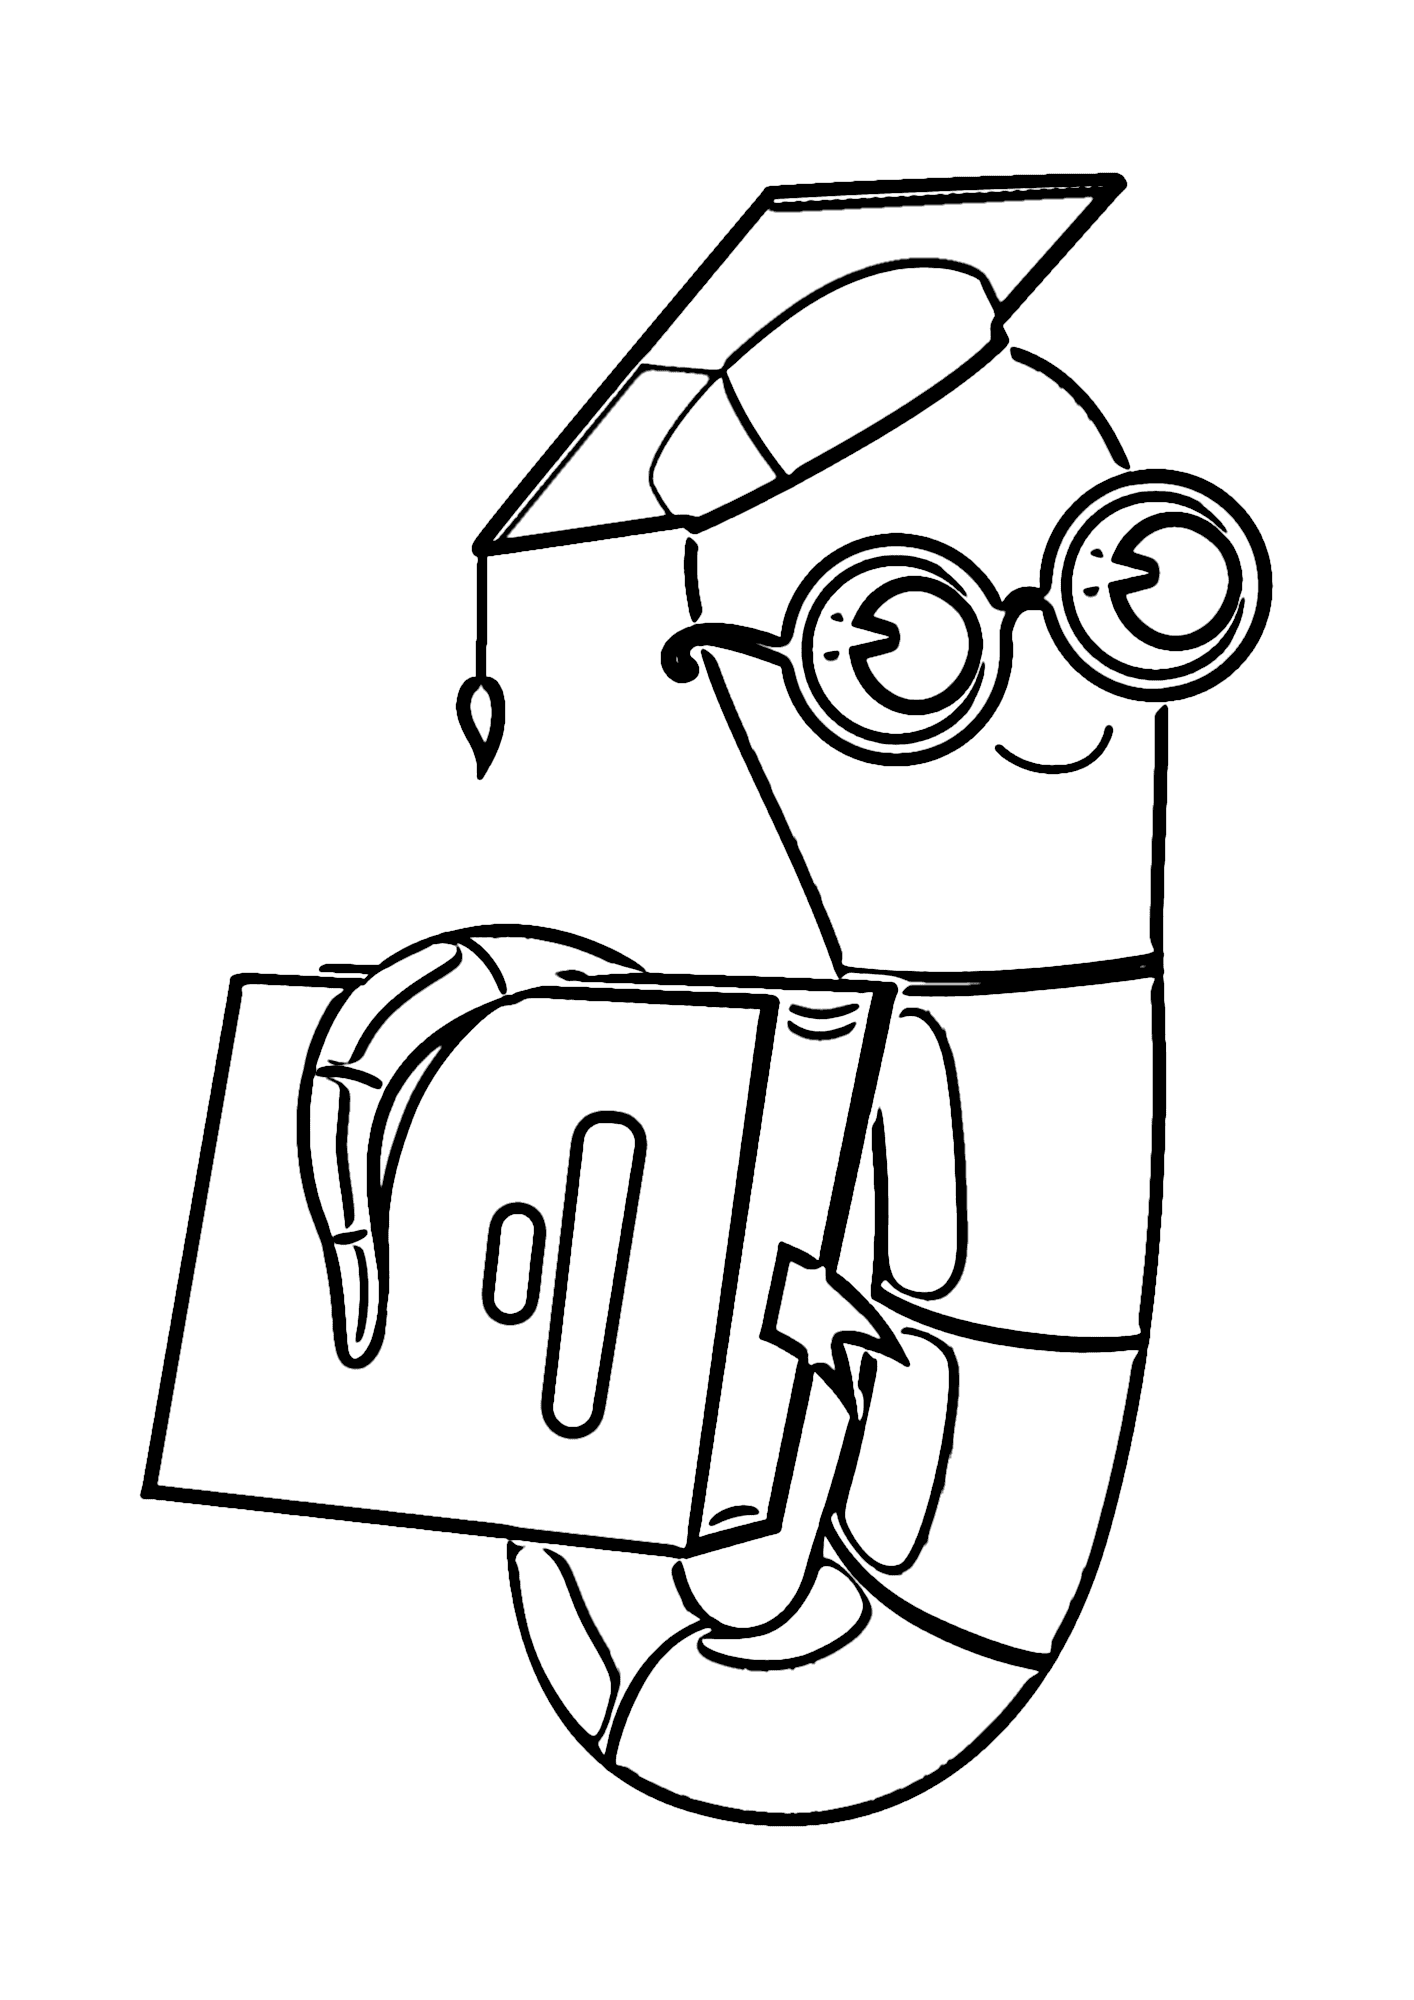 Earthworm Printable Coloring Page